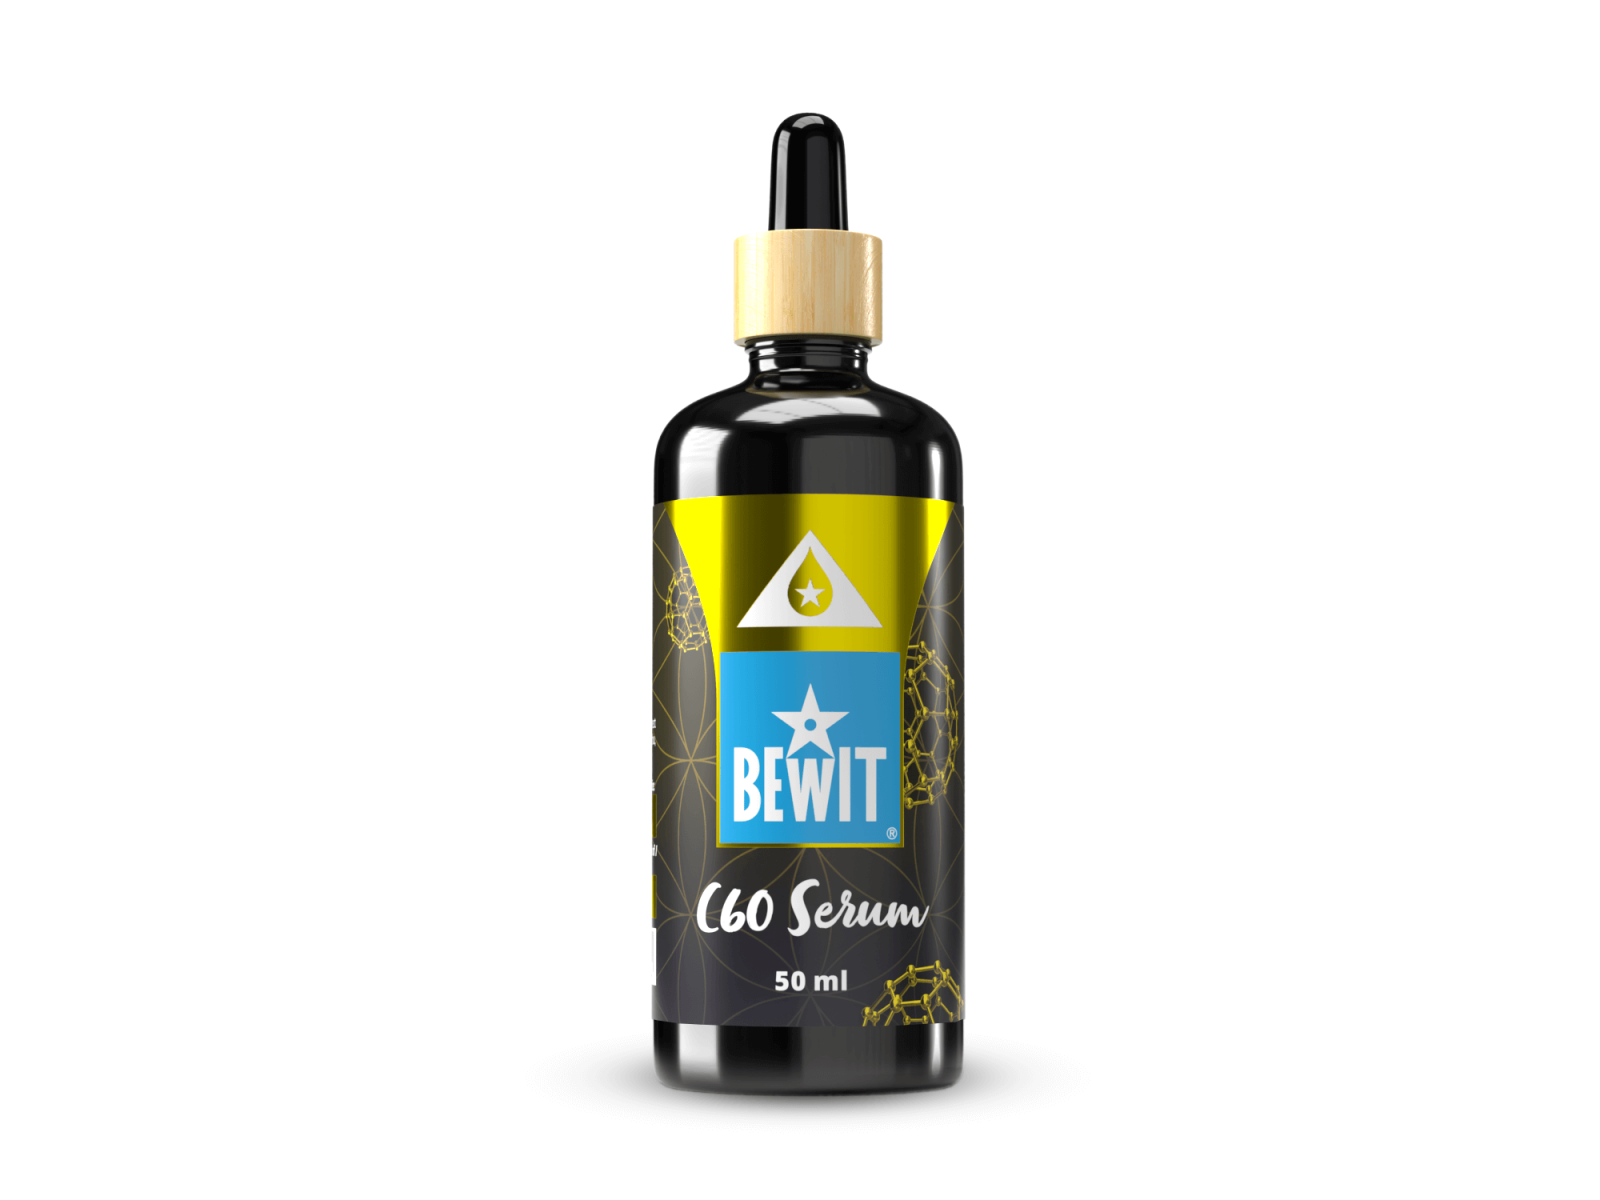 BEWIT C60 SERUM - For perfectly hydrated, unified and fresh skin - 1